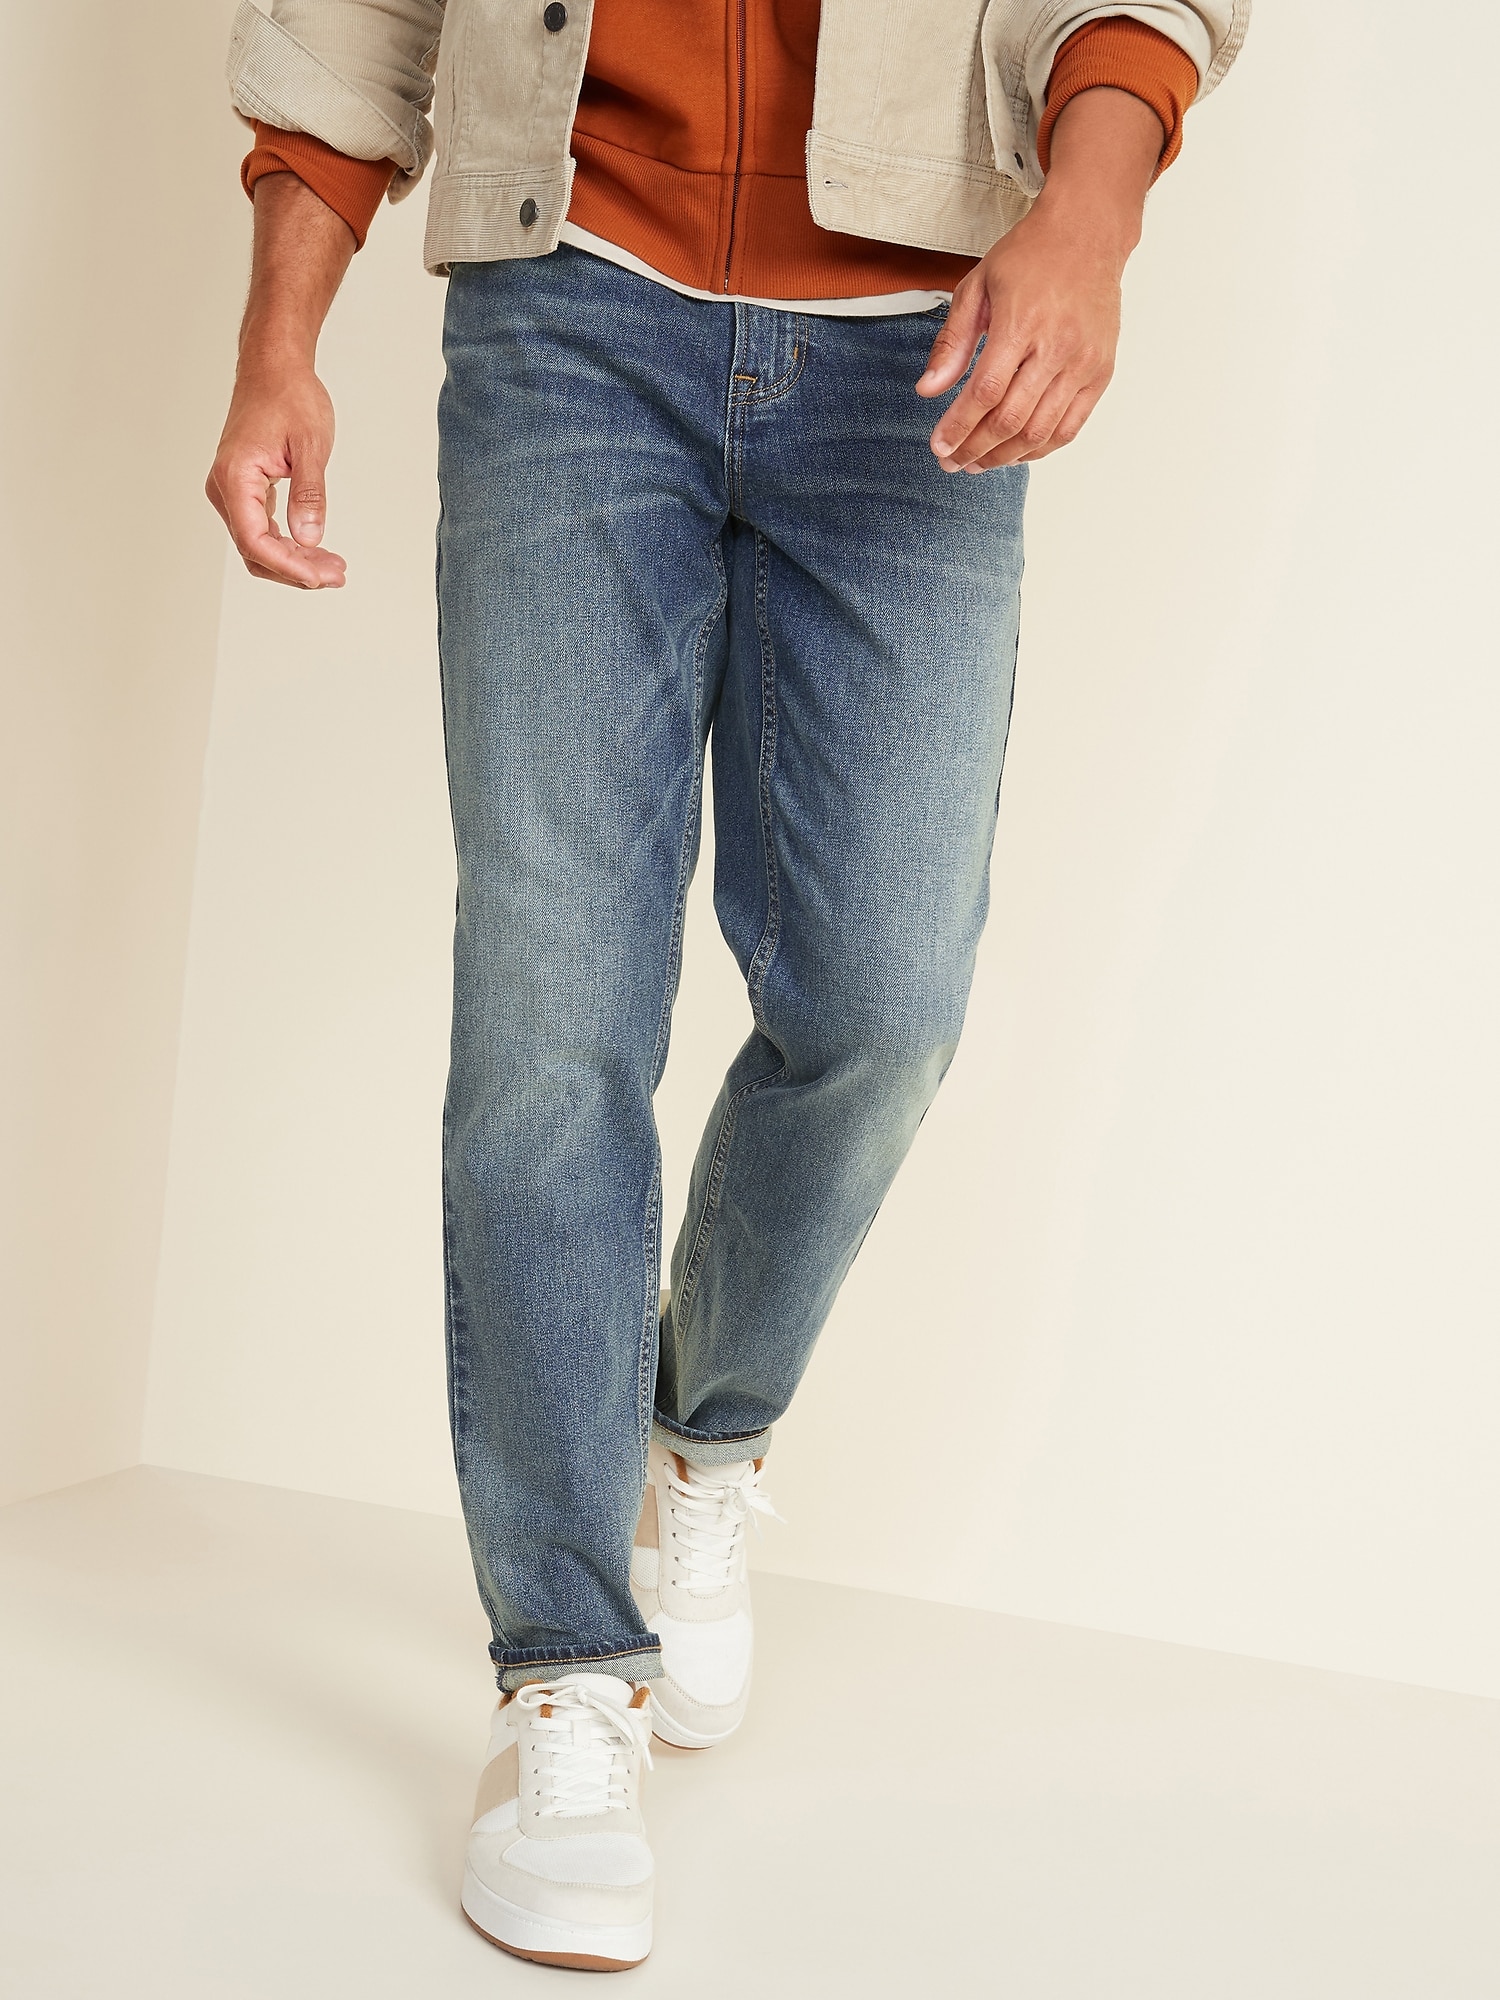 old navy mens athletic jeans